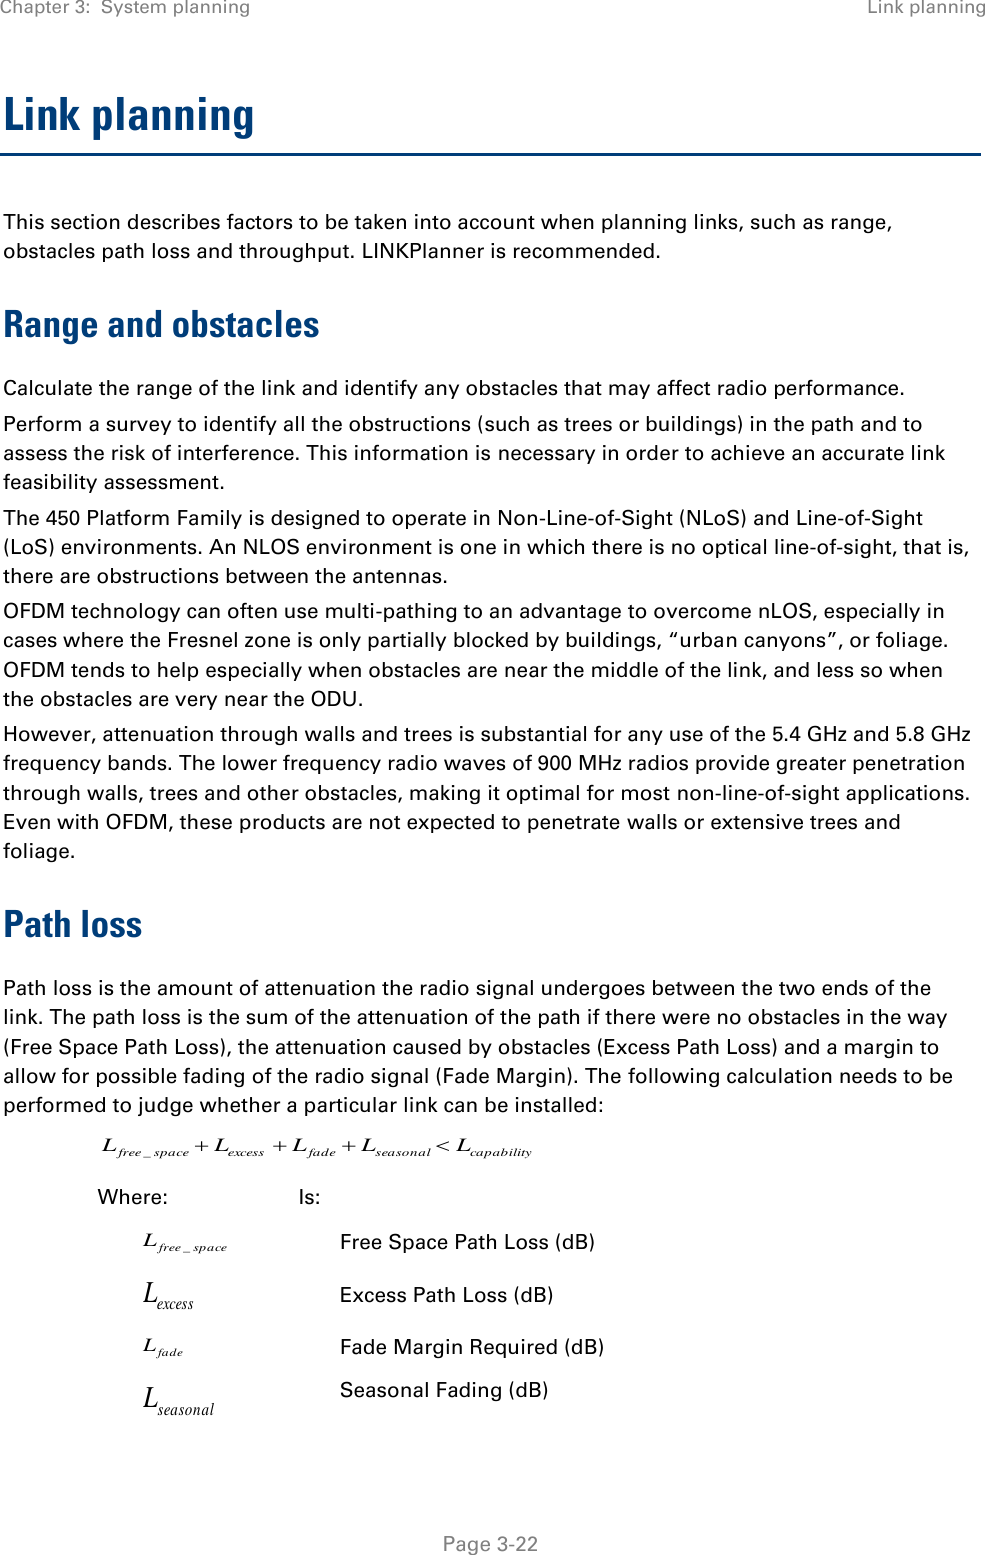 Chapter 3:  System planning Link planning   Page 3-22 Link planning This section describes factors to be taken into account when planning links, such as range, obstacles path loss and throughput. LINKPlanner is recommended. Range and obstacles Calculate the range of the link and identify any obstacles that may affect radio performance. Perform a survey to identify all the obstructions (such as trees or buildings) in the path and to assess the risk of interference. This information is necessary in order to achieve an accurate link feasibility assessment. The 450 Platform Family is designed to operate in Non-Line-of-Sight (NLoS) and Line-of-Sight (LoS) environments. An NLOS environment is one in which there is no optical line-of-sight, that is, there are obstructions between the antennas. OFDM technology can often use multi-pathing to an advantage to overcome nLOS, especially in cases where the Fresnel zone is only partially blocked by buildings, “urban canyons”, or foliage. OFDM tends to help especially when obstacles are near the middle of the link, and less so when the obstacles are very near the ODU. However, attenuation through walls and trees is substantial for any use of the 5.4 GHz and 5.8 GHz frequency bands. The lower frequency radio waves of 900 MHz radios provide greater penetration through walls, trees and other obstacles, making it optimal for most non-line-of-sight applications. Even with OFDM, these products are not expected to penetrate walls or extensive trees and foliage. Path loss Path loss is the amount of attenuation the radio signal undergoes between the two ends of the link. The path loss is the sum of the attenuation of the path if there were no obstacles in the way (Free Space Path Loss), the attenuation caused by obstacles (Excess Path Loss) and a margin to allow for possible fading of the radio signal (Fade Margin). The following calculation needs to be performed to judge whether a particular link can be installed: capabilityseasonalfadeexcessspacefree LLLLL _ Where: Is: spacefreeL_ Free Space Path Loss (dB) excessL Excess Path Loss (dB) fadeL Fade Margin Required (dB) seasonalL Seasonal Fading (dB) 